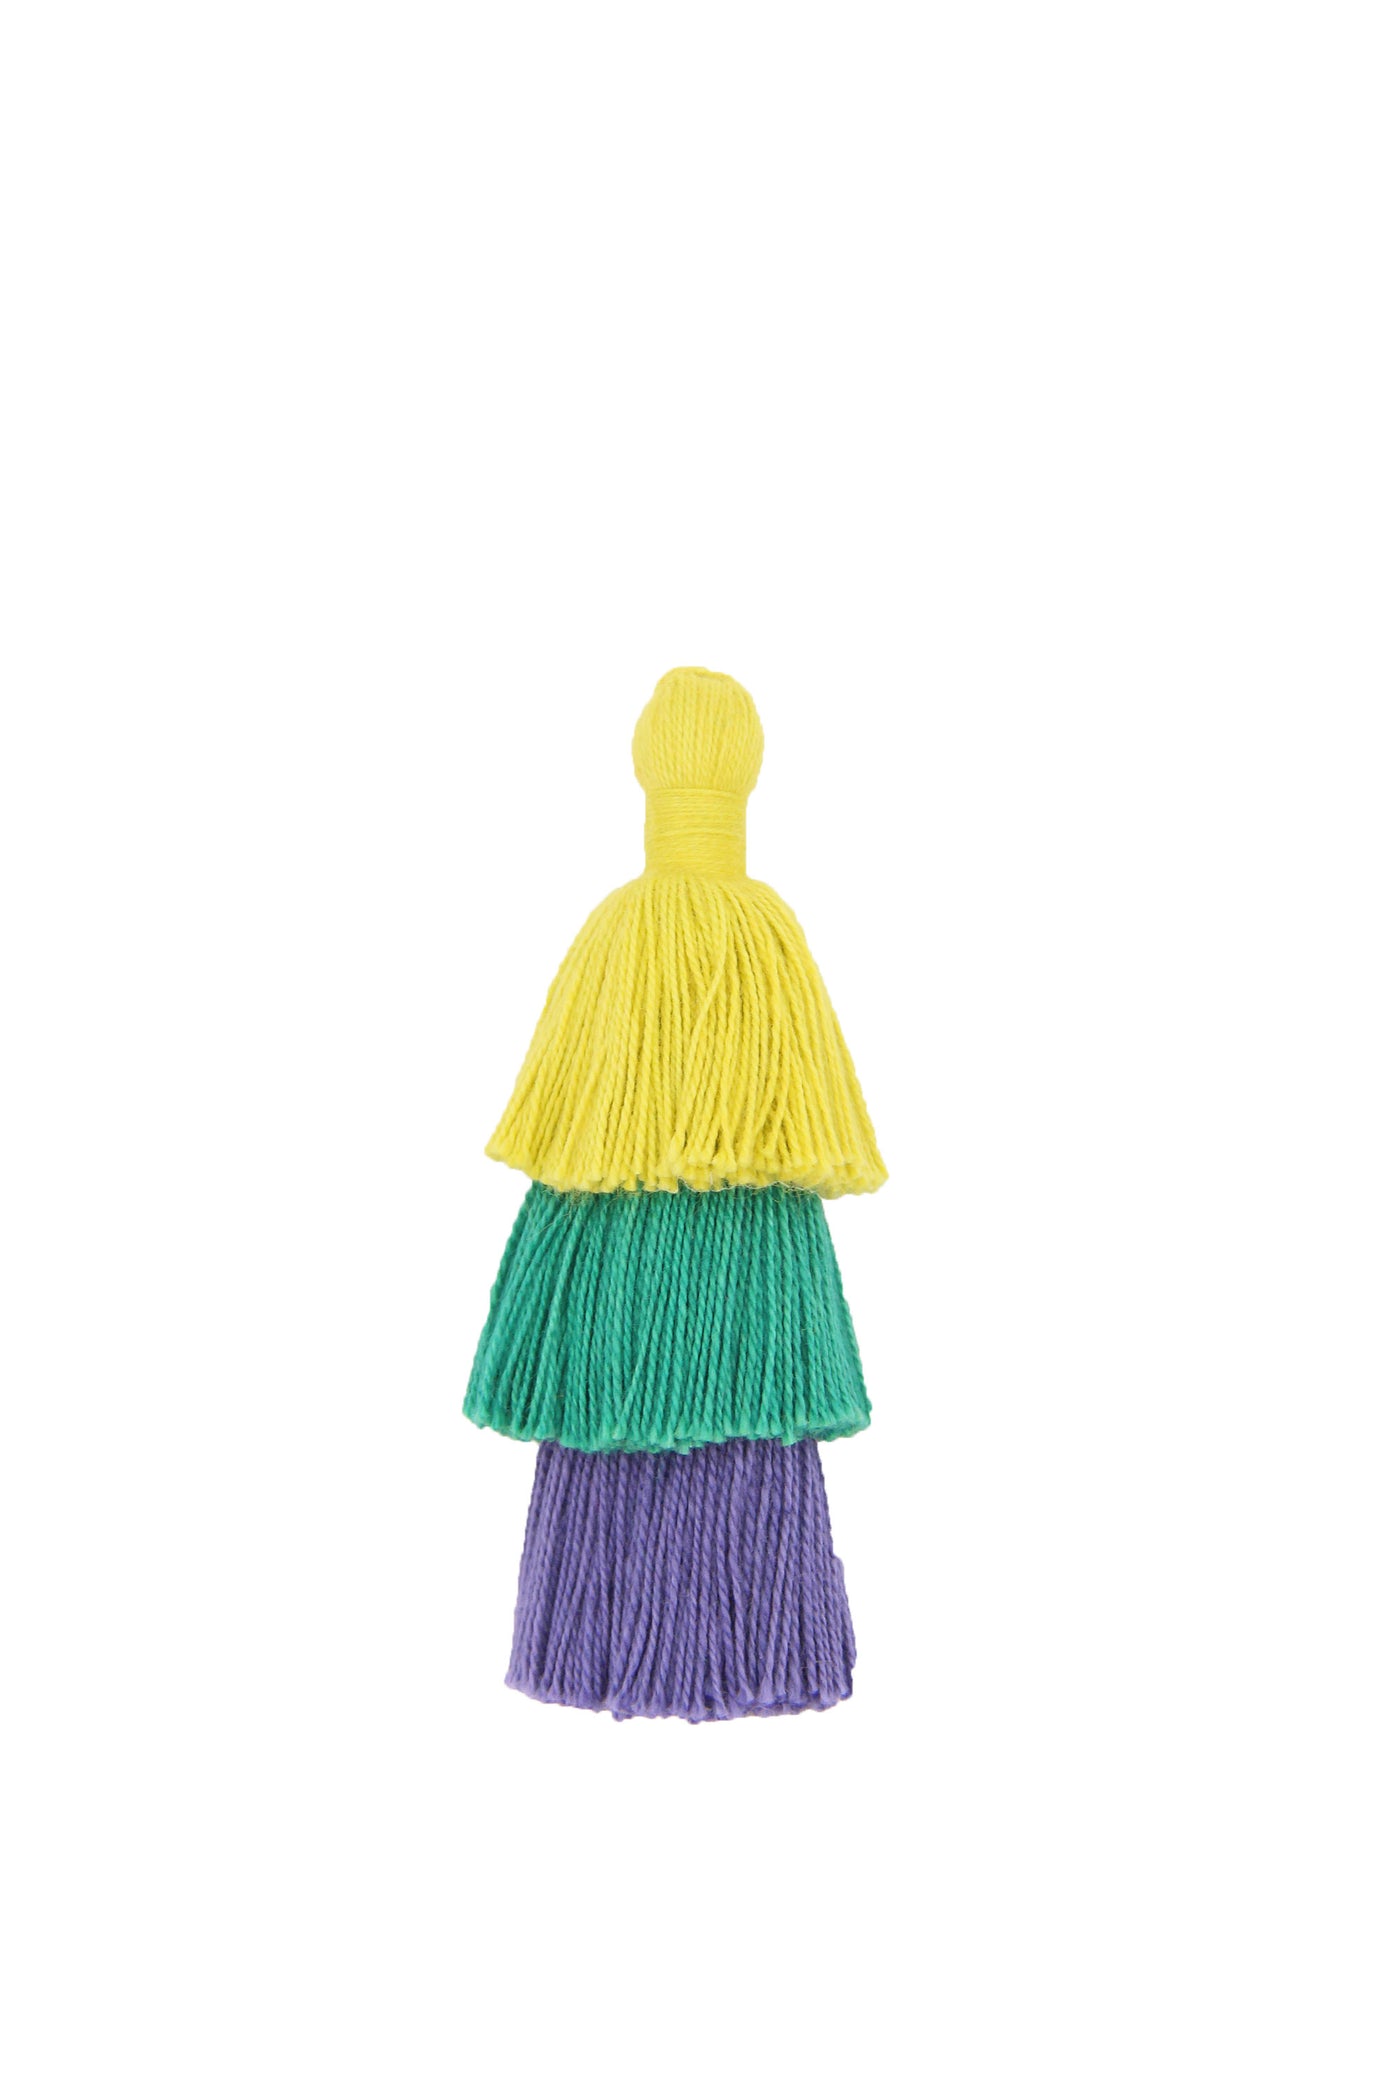 Bright Cotton Tiered Tassels for Earrings